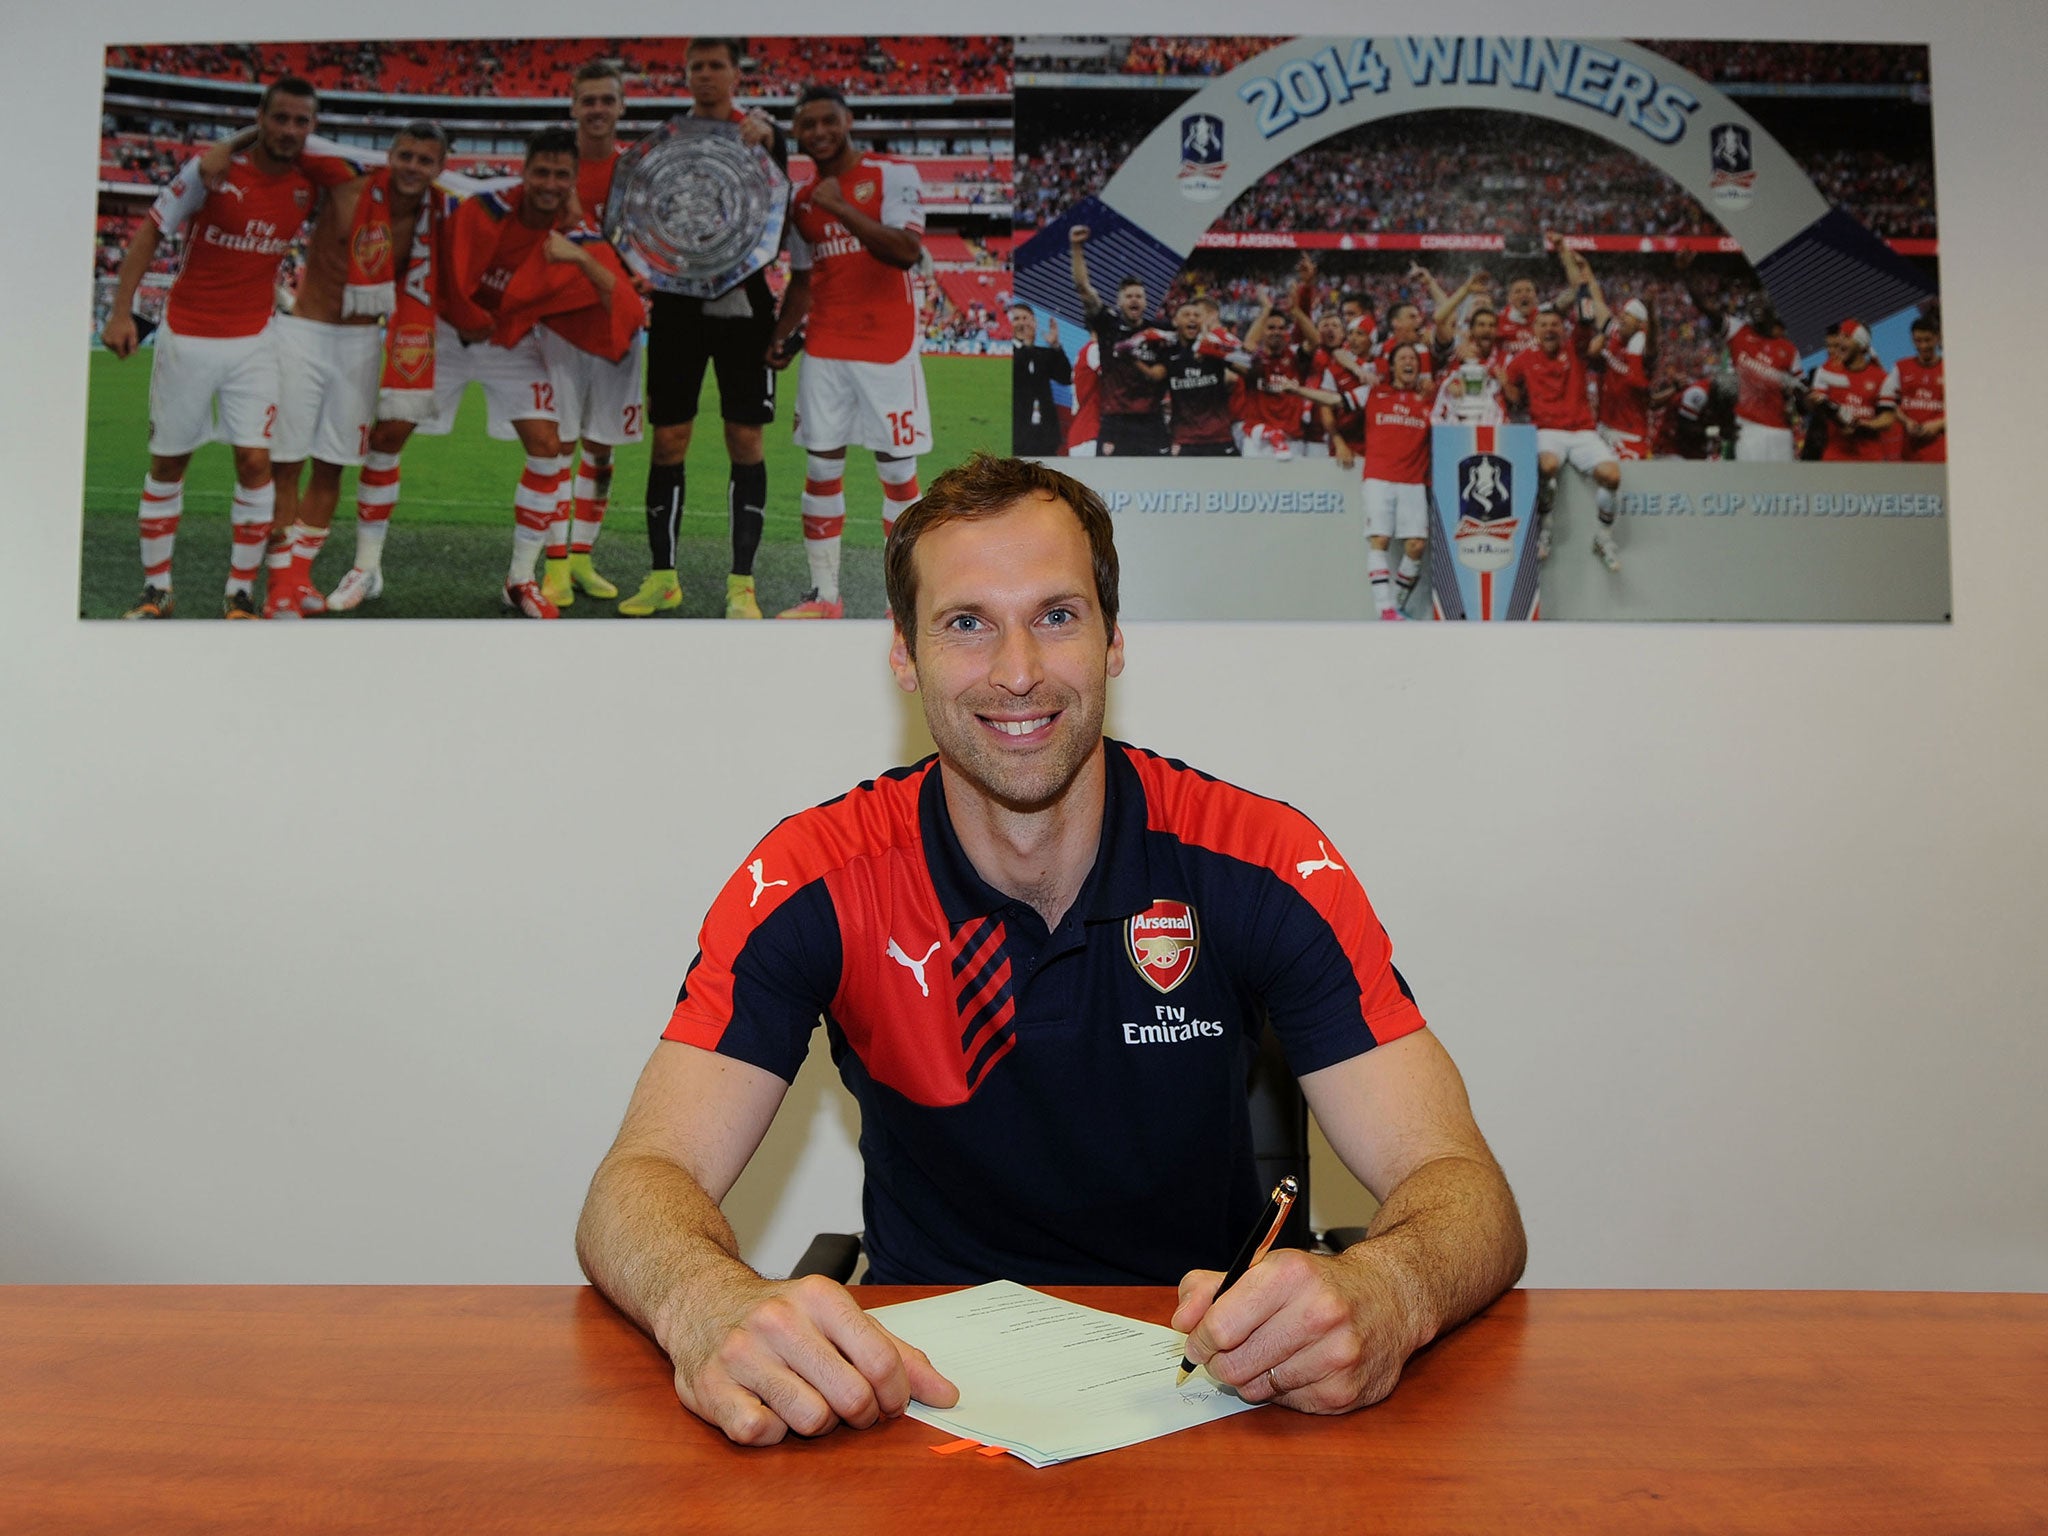 Arsenal unveil Petr Cech as their newest signing